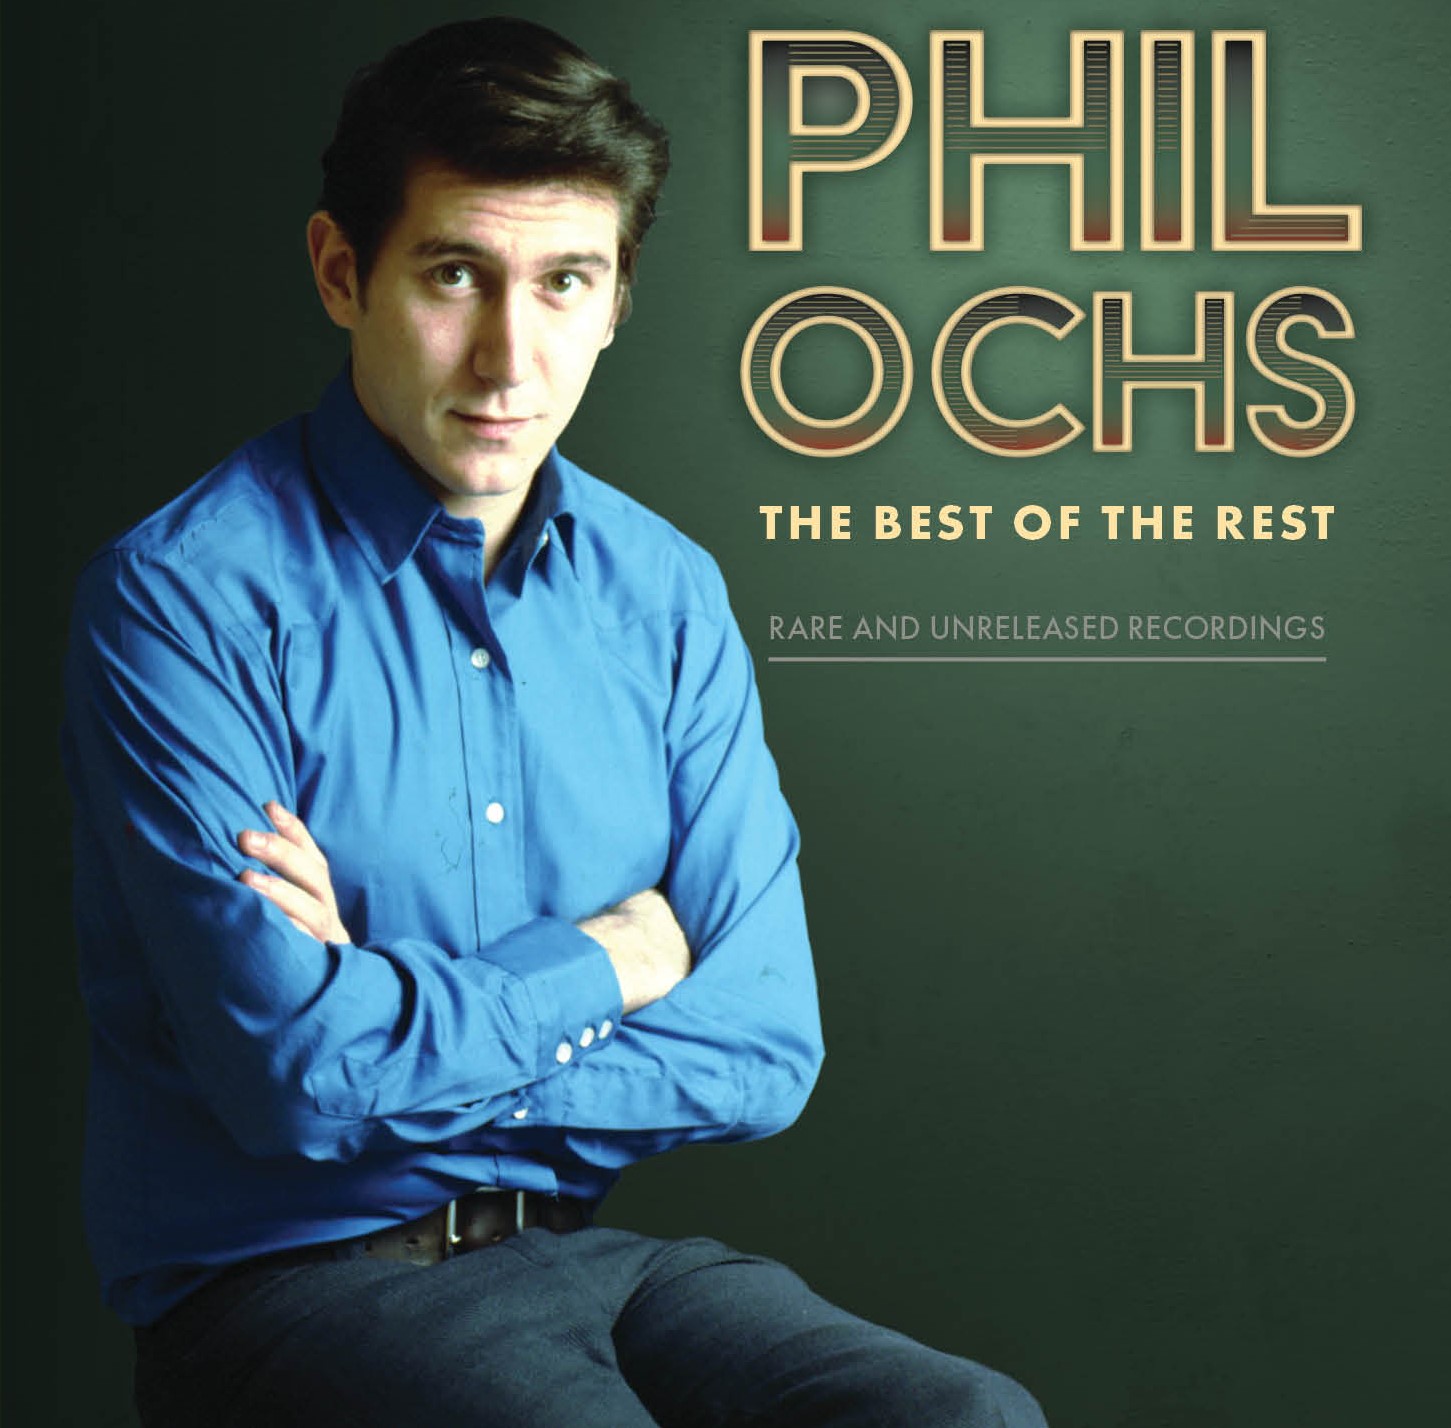 Rare & Unreleased Songs of Phil Ochs to be Released